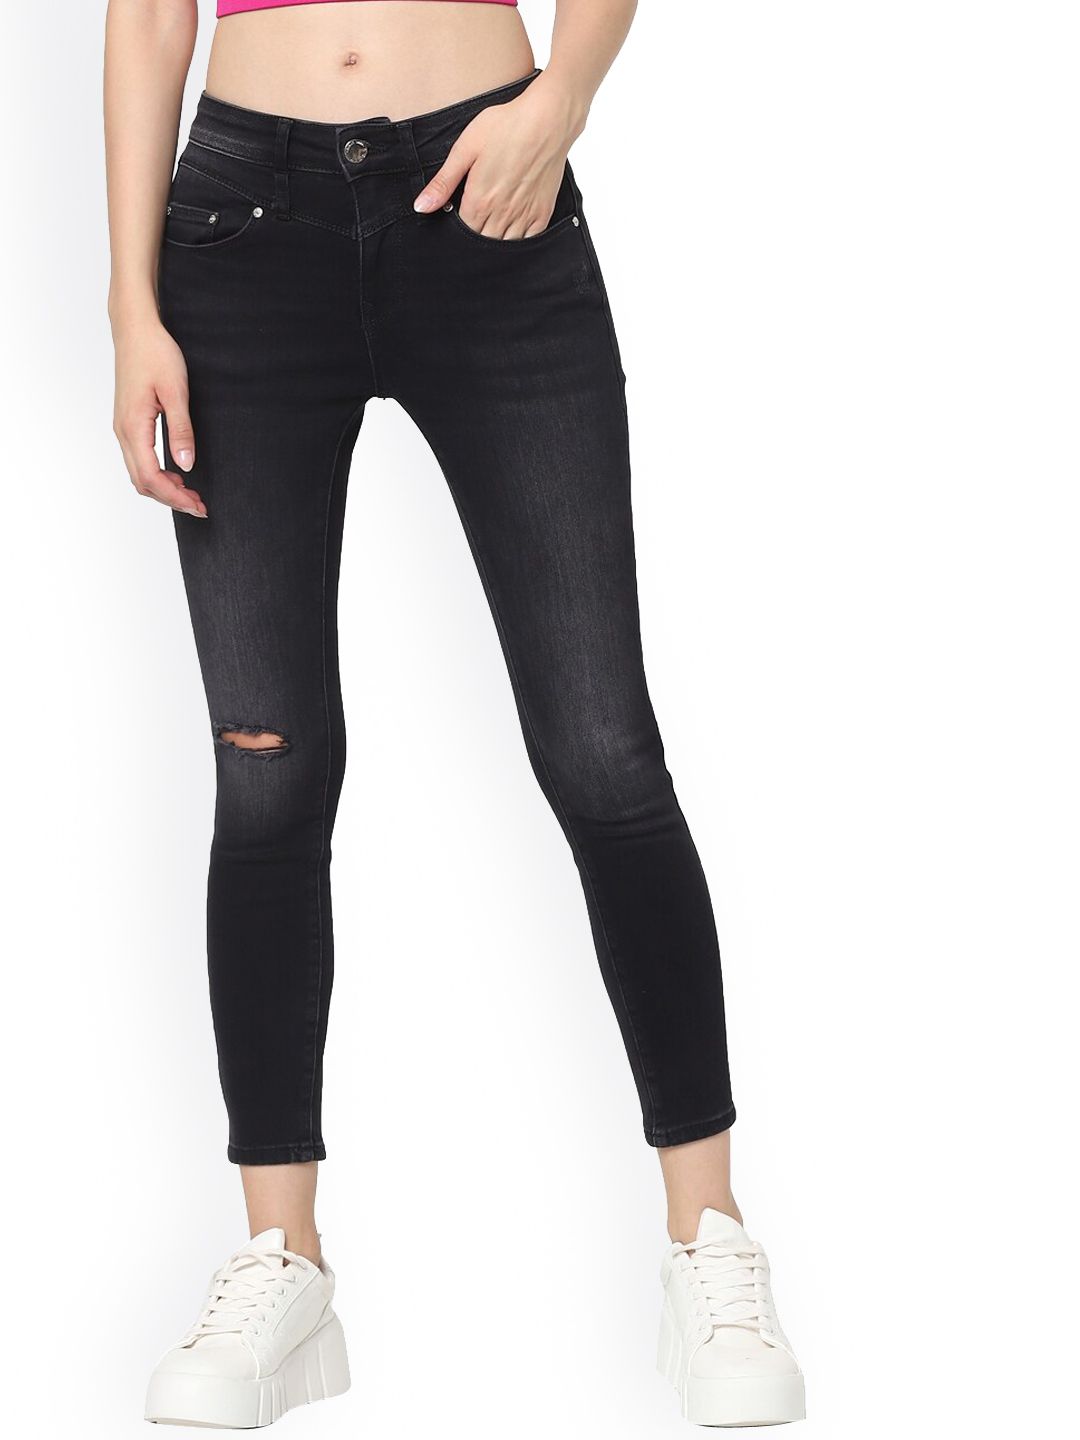 ONLY Women Black Skinny Fit Mildly Distressed Jeans Price in India